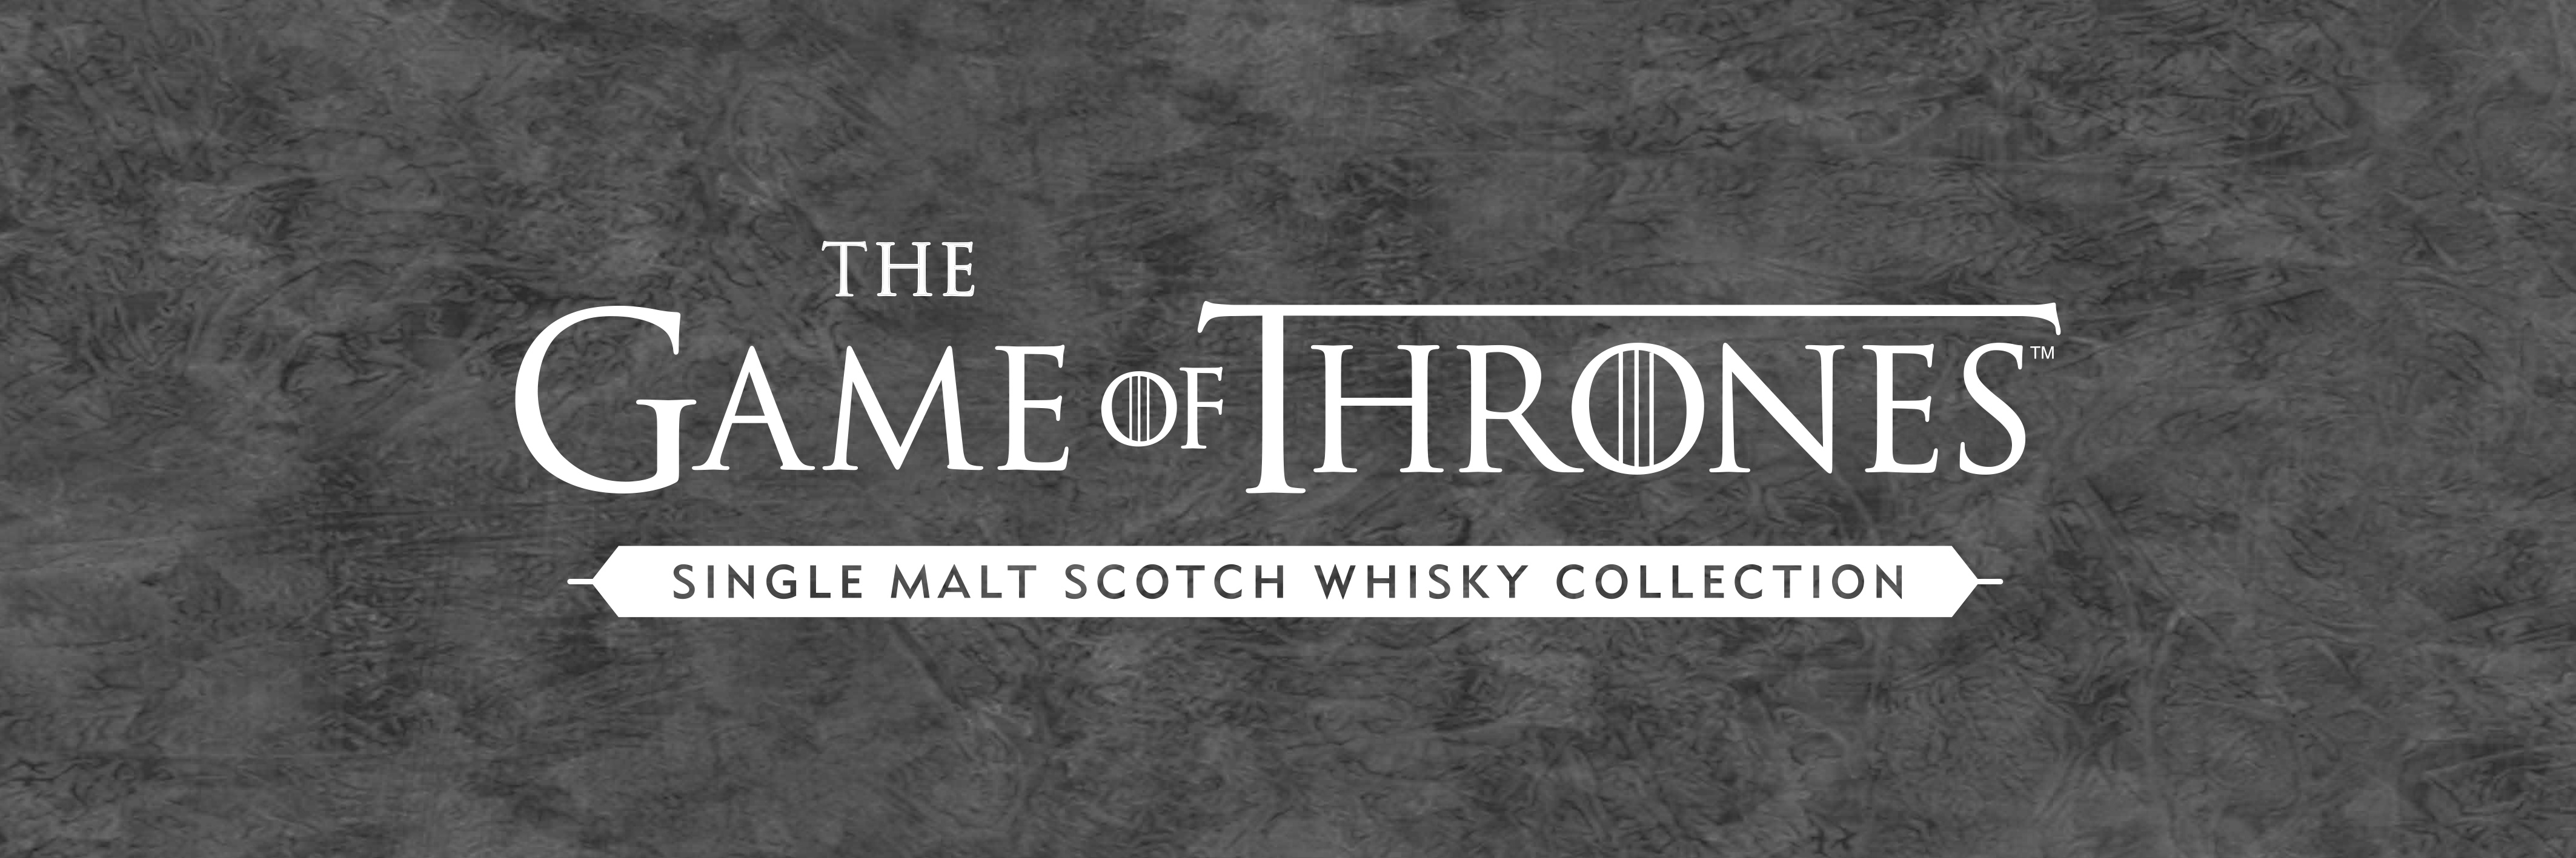 JNW Game of Throne Malts 1